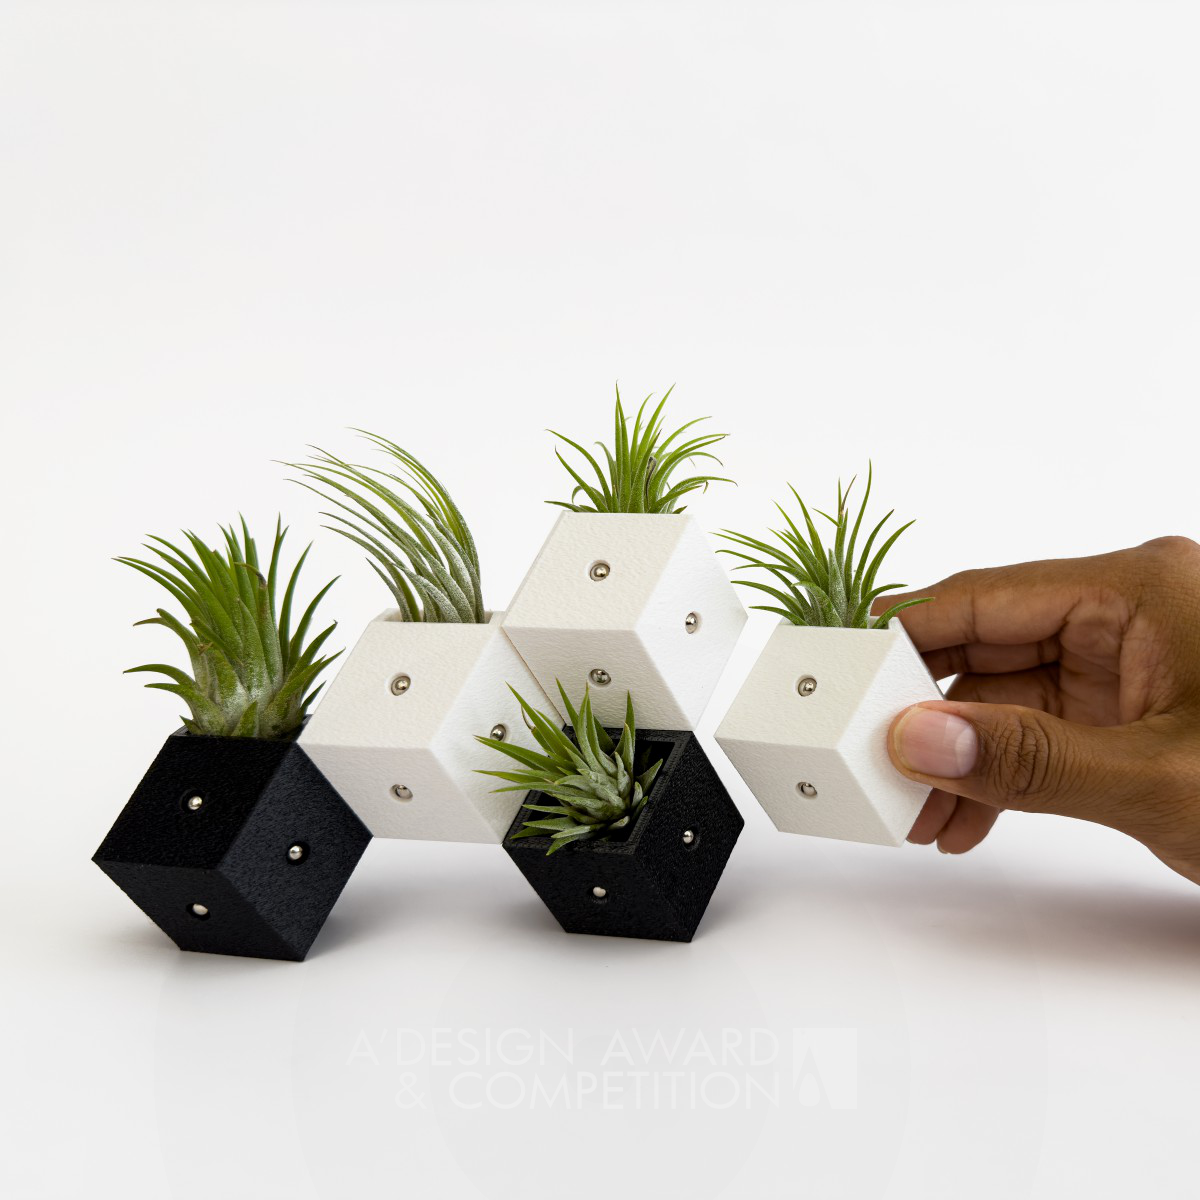 Xavier Zhagui wins Iron at the prestigious A' 3D Printed Forms and Products Design Award with Plan Ta Modular Vase .